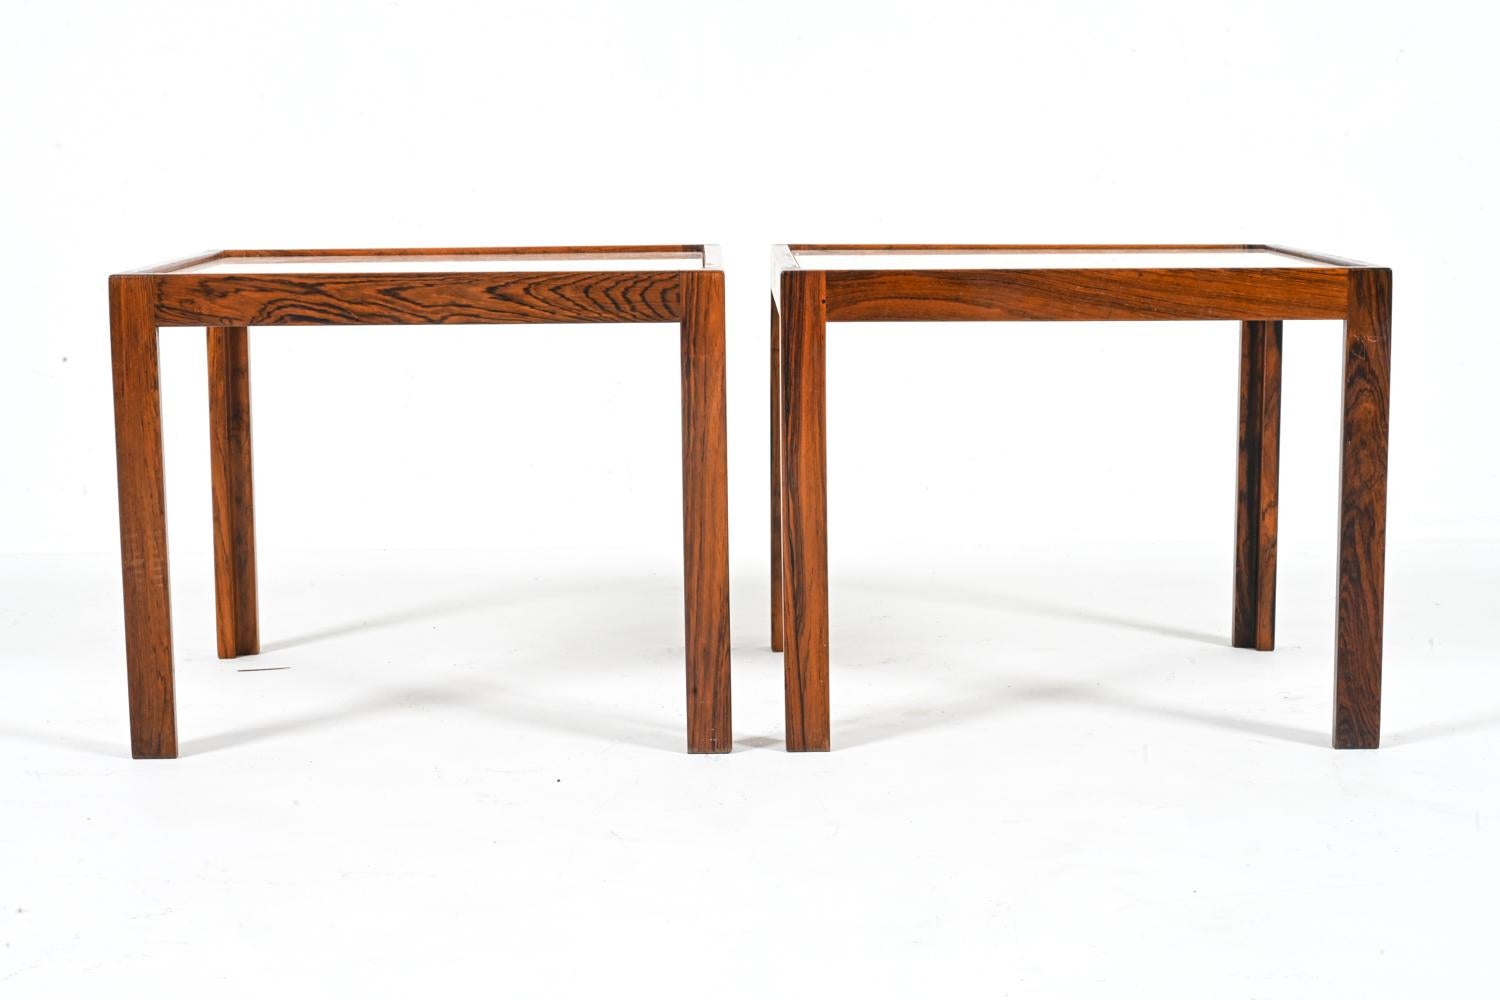 Crafted from two of the most luxurious materials in the world - solid rosewood and pink marble - these exquisite side tables feature clean lines and an airy, open silhouette, making them adaptable to a wide variety of interior design styles, from